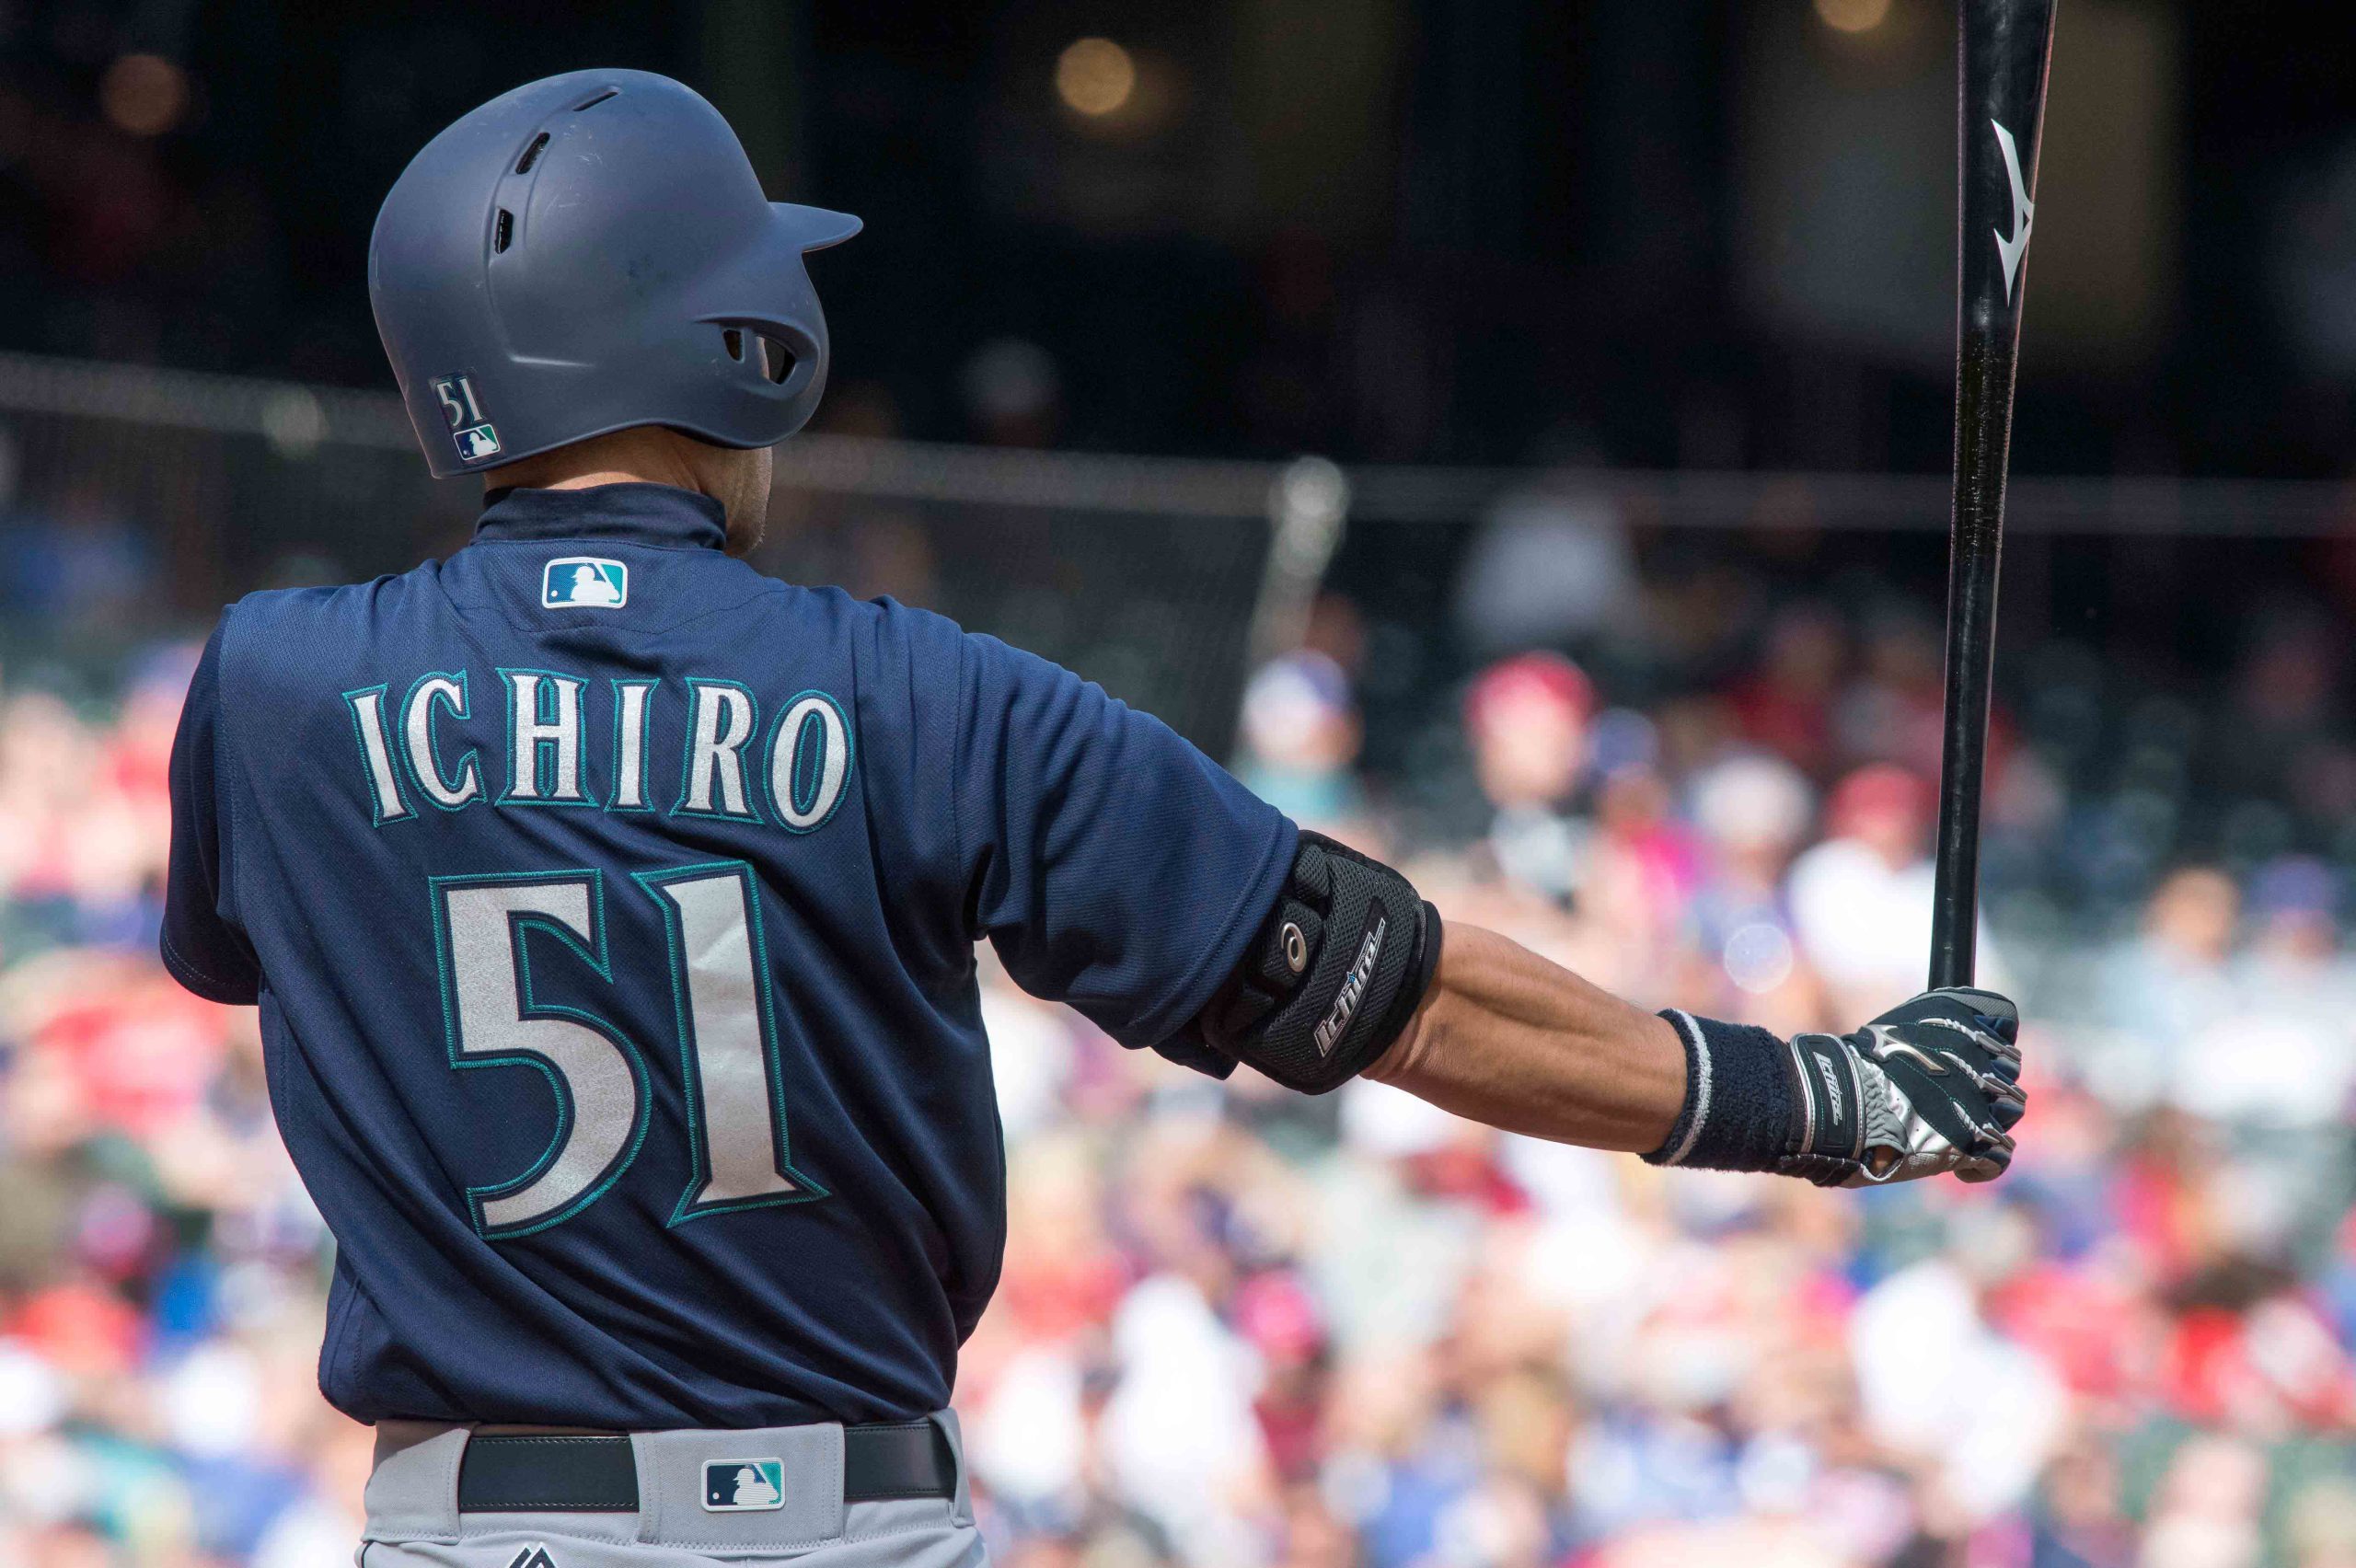 The minor league coach who made 3,000 hits possible for Ichiro